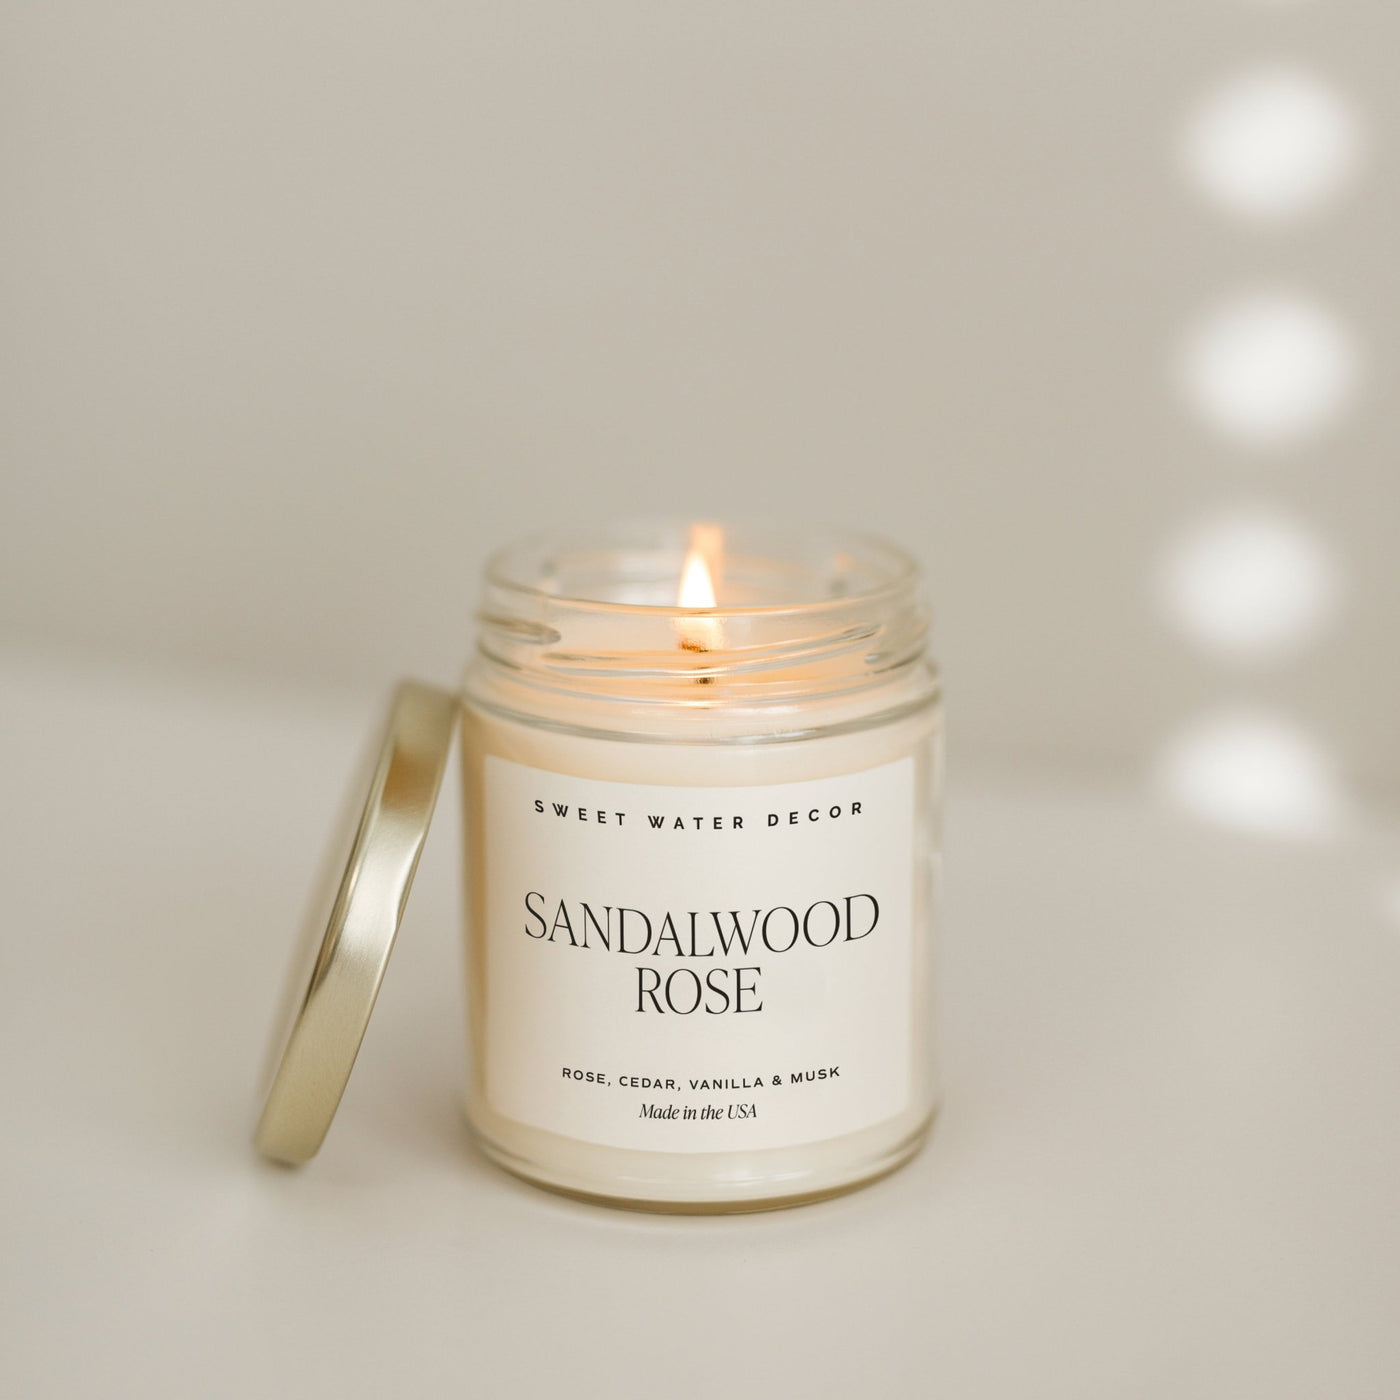 Sandalwood Rose Soy Candle - Clear Jar - 9 oz - Sweet Water Decor - Candles